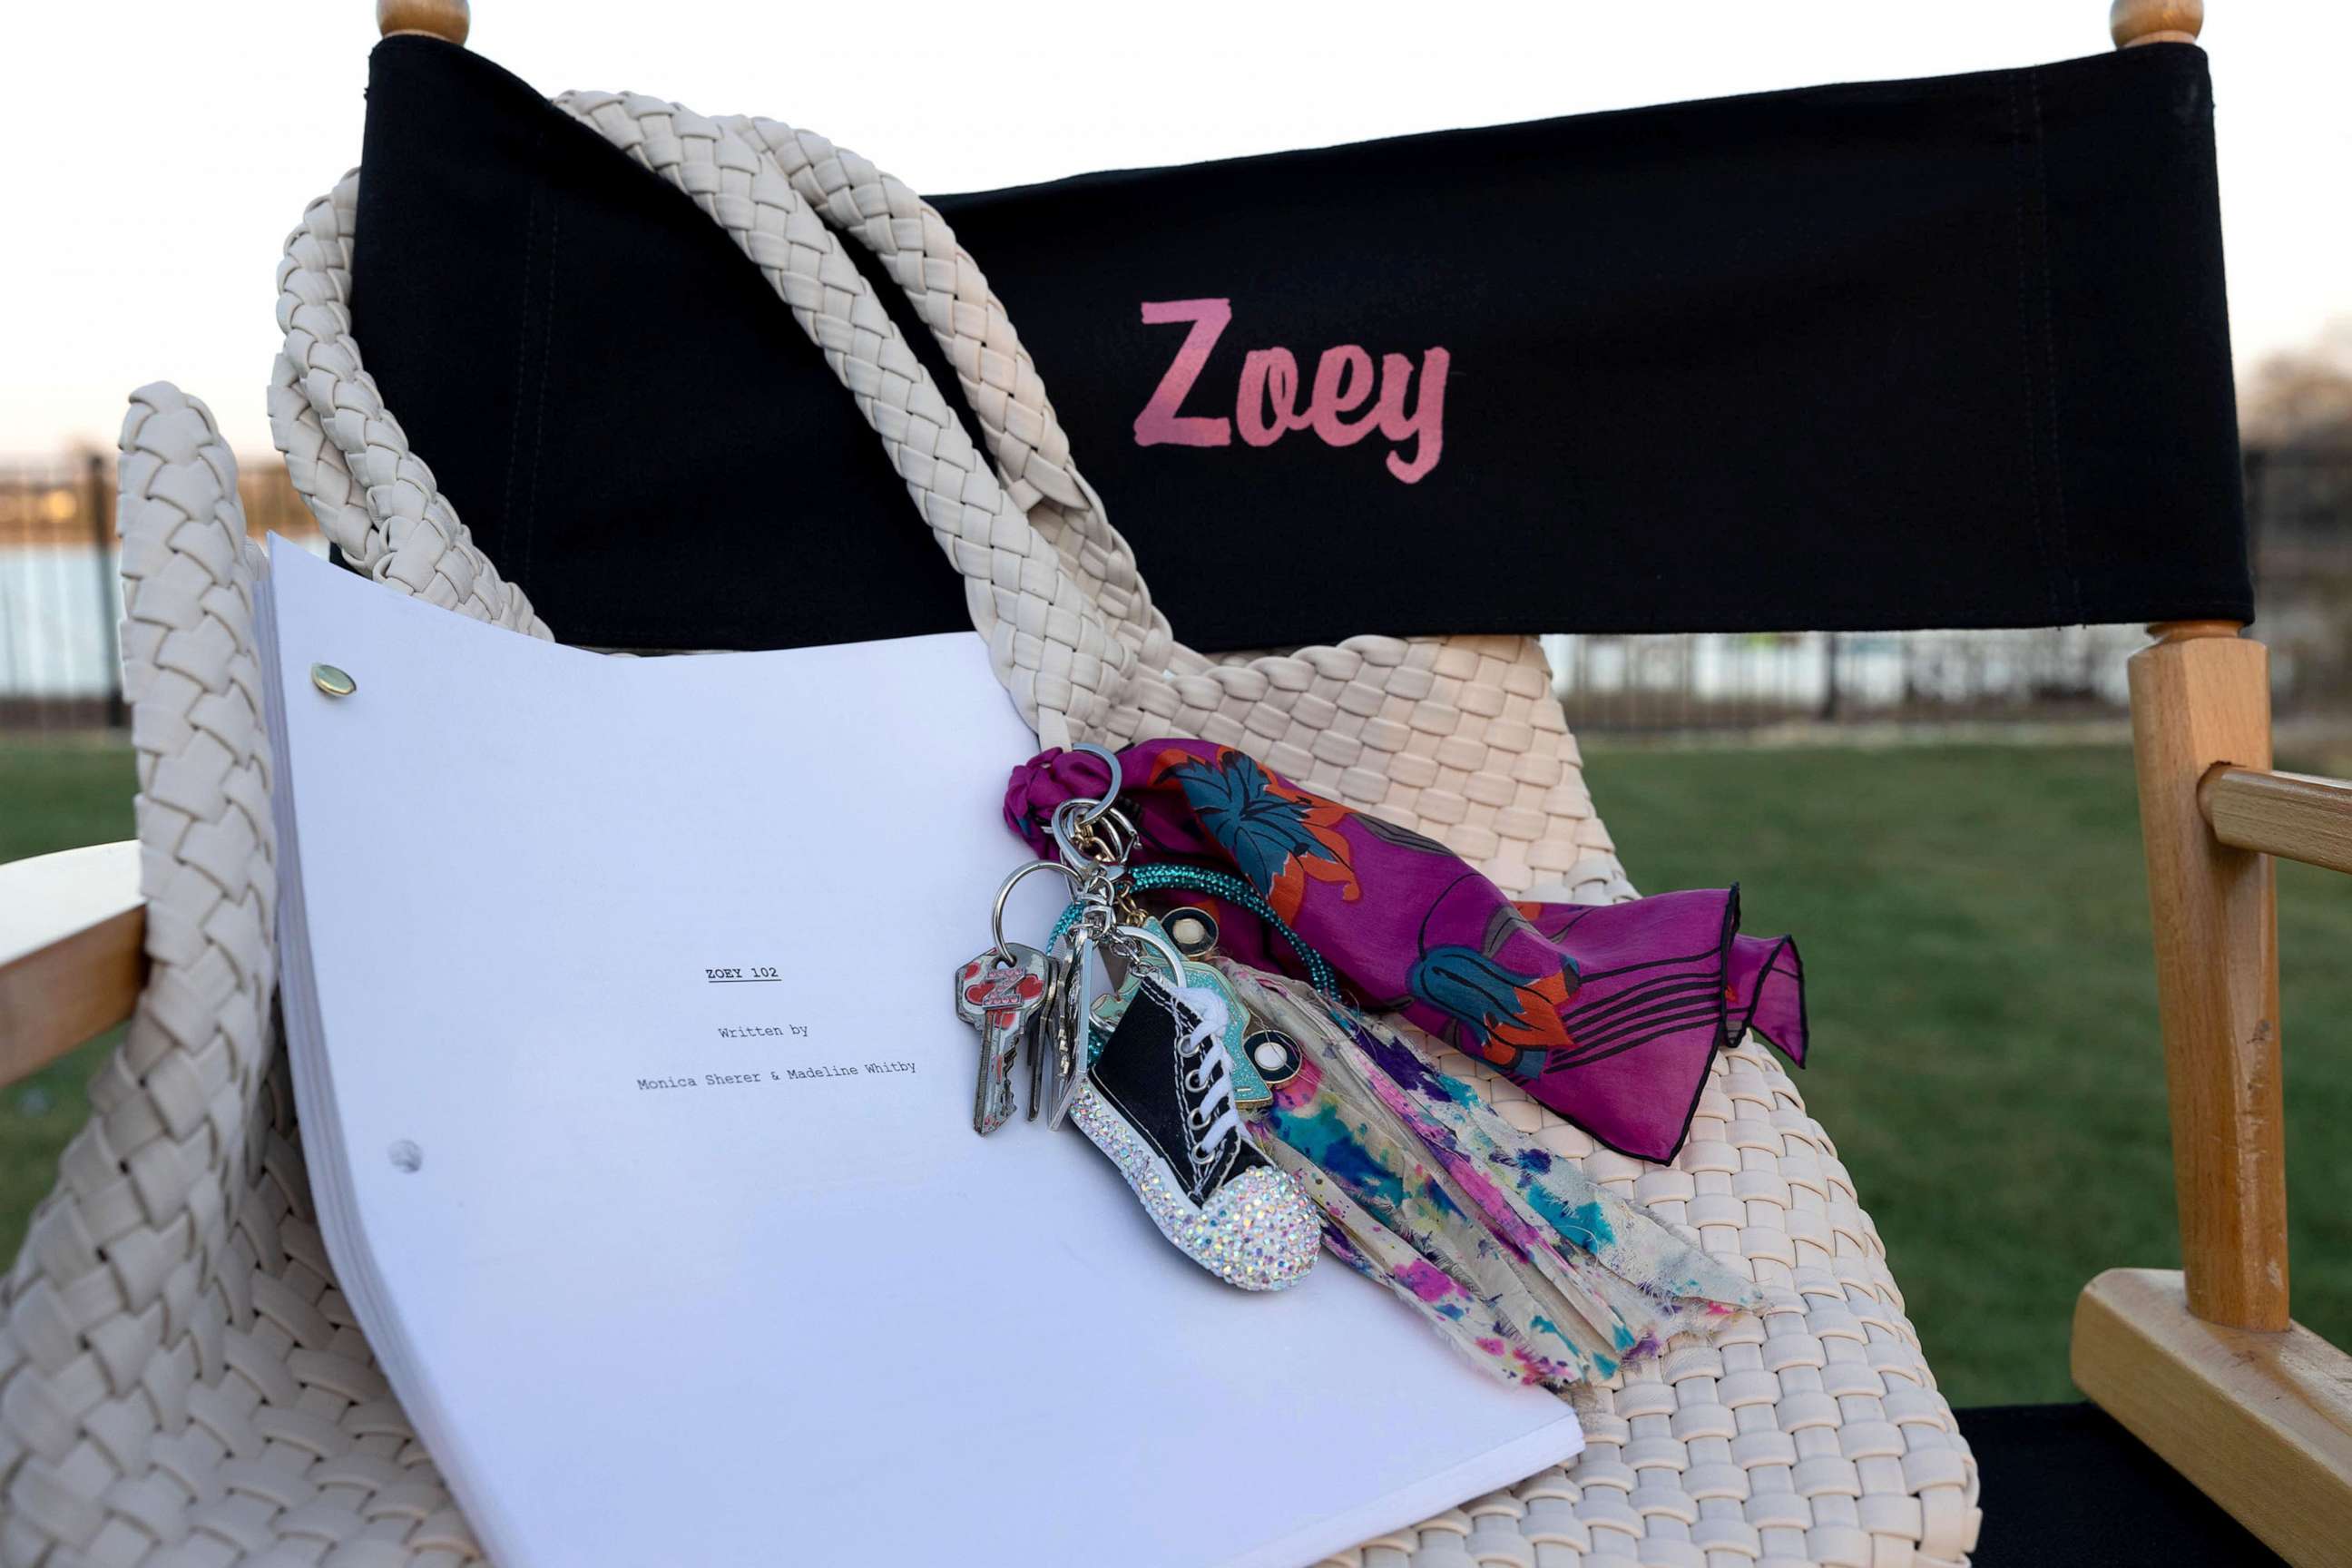 PHOTO: First look photo of upcoming "Zoey 102" film.